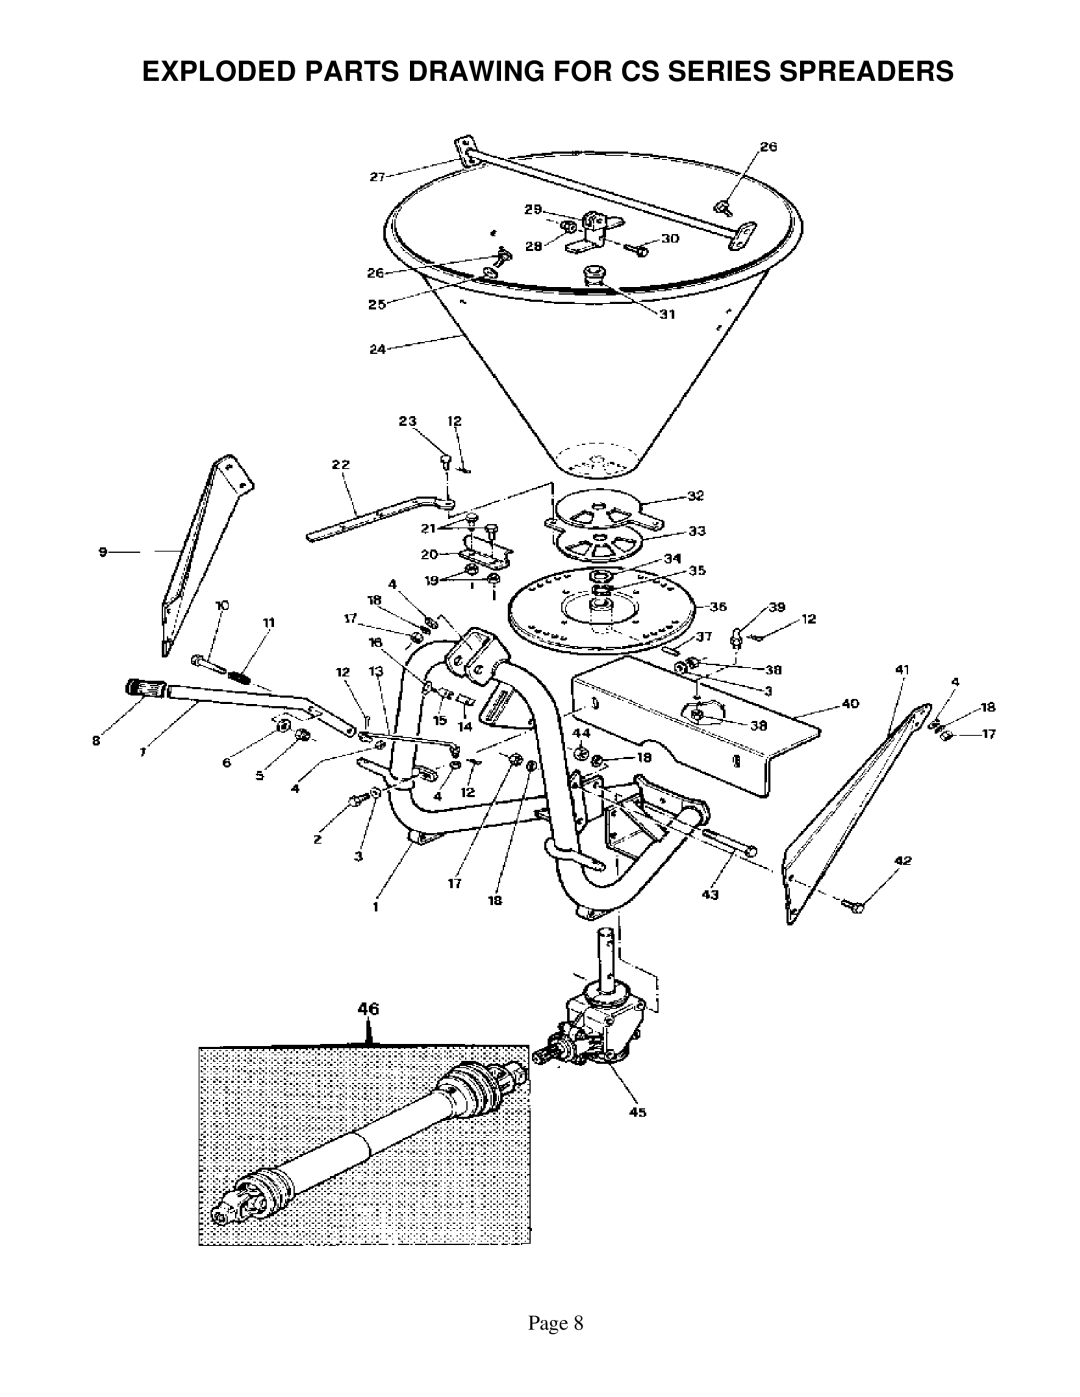 Worksaver CS-694, CS-1094, CSP-694, CSP-1094 instruction manual Exploded Parts Drawing For Cs Series Spreaders, Page 